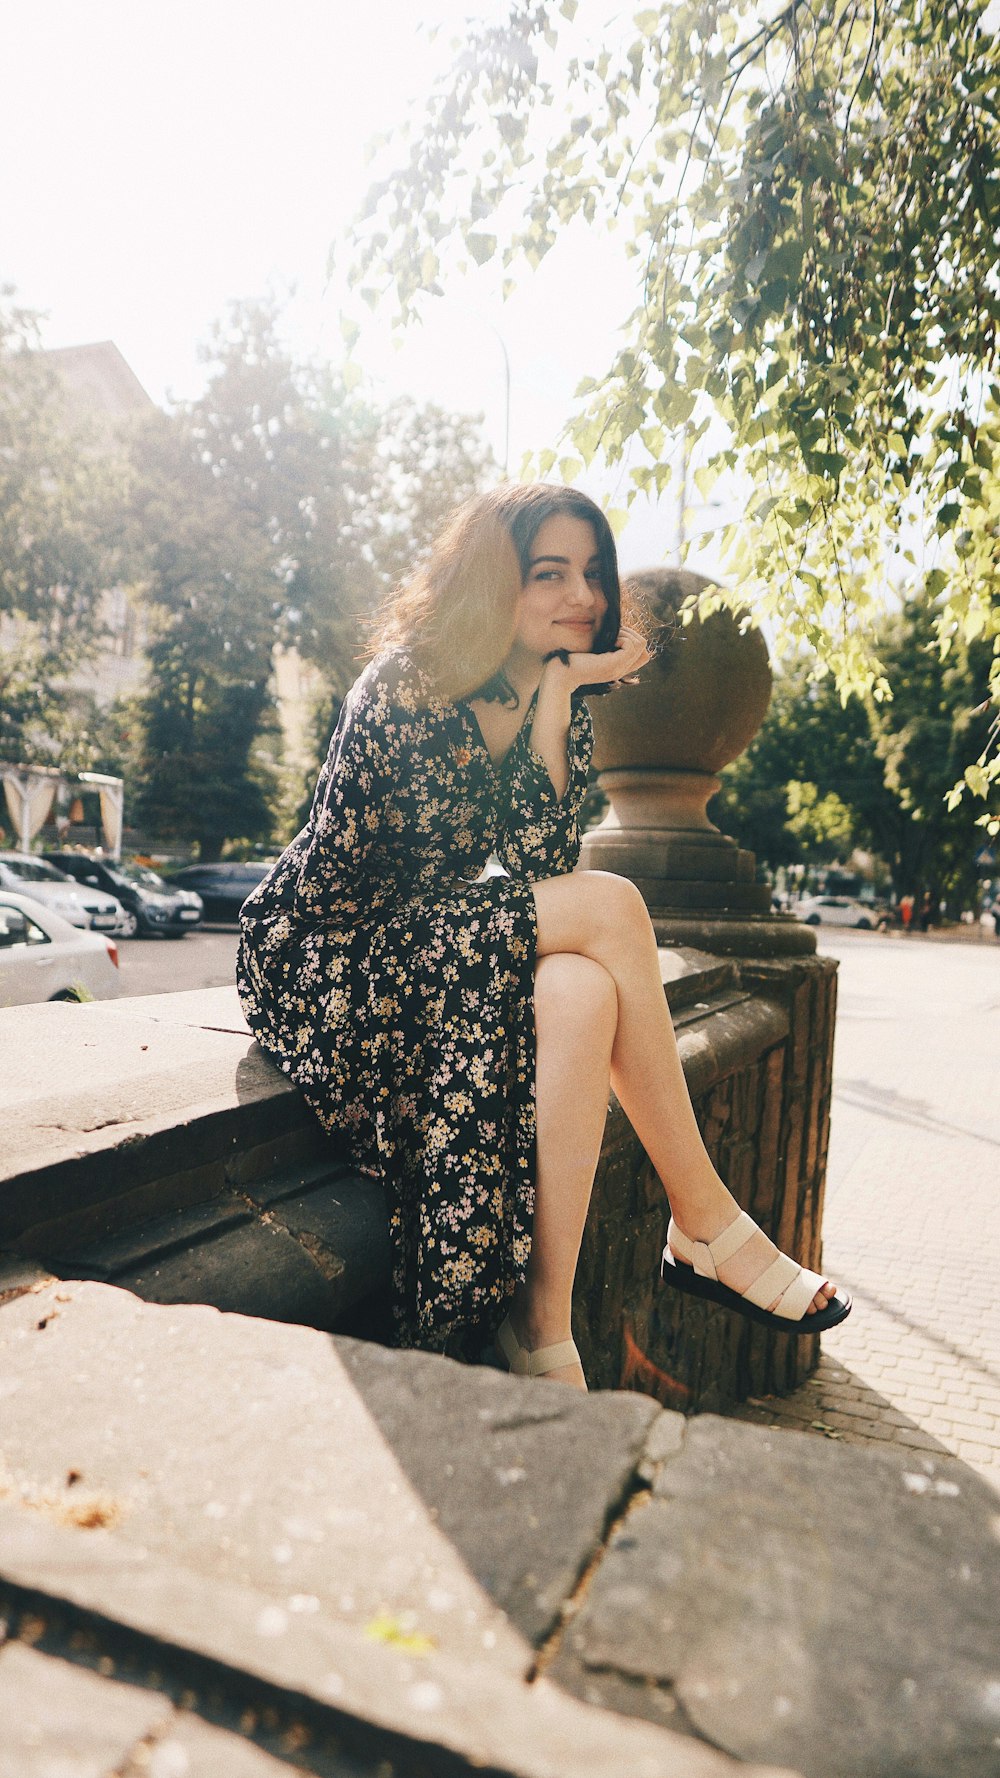 woman in black and white floral dress sitting on brown wooden bench during daytime